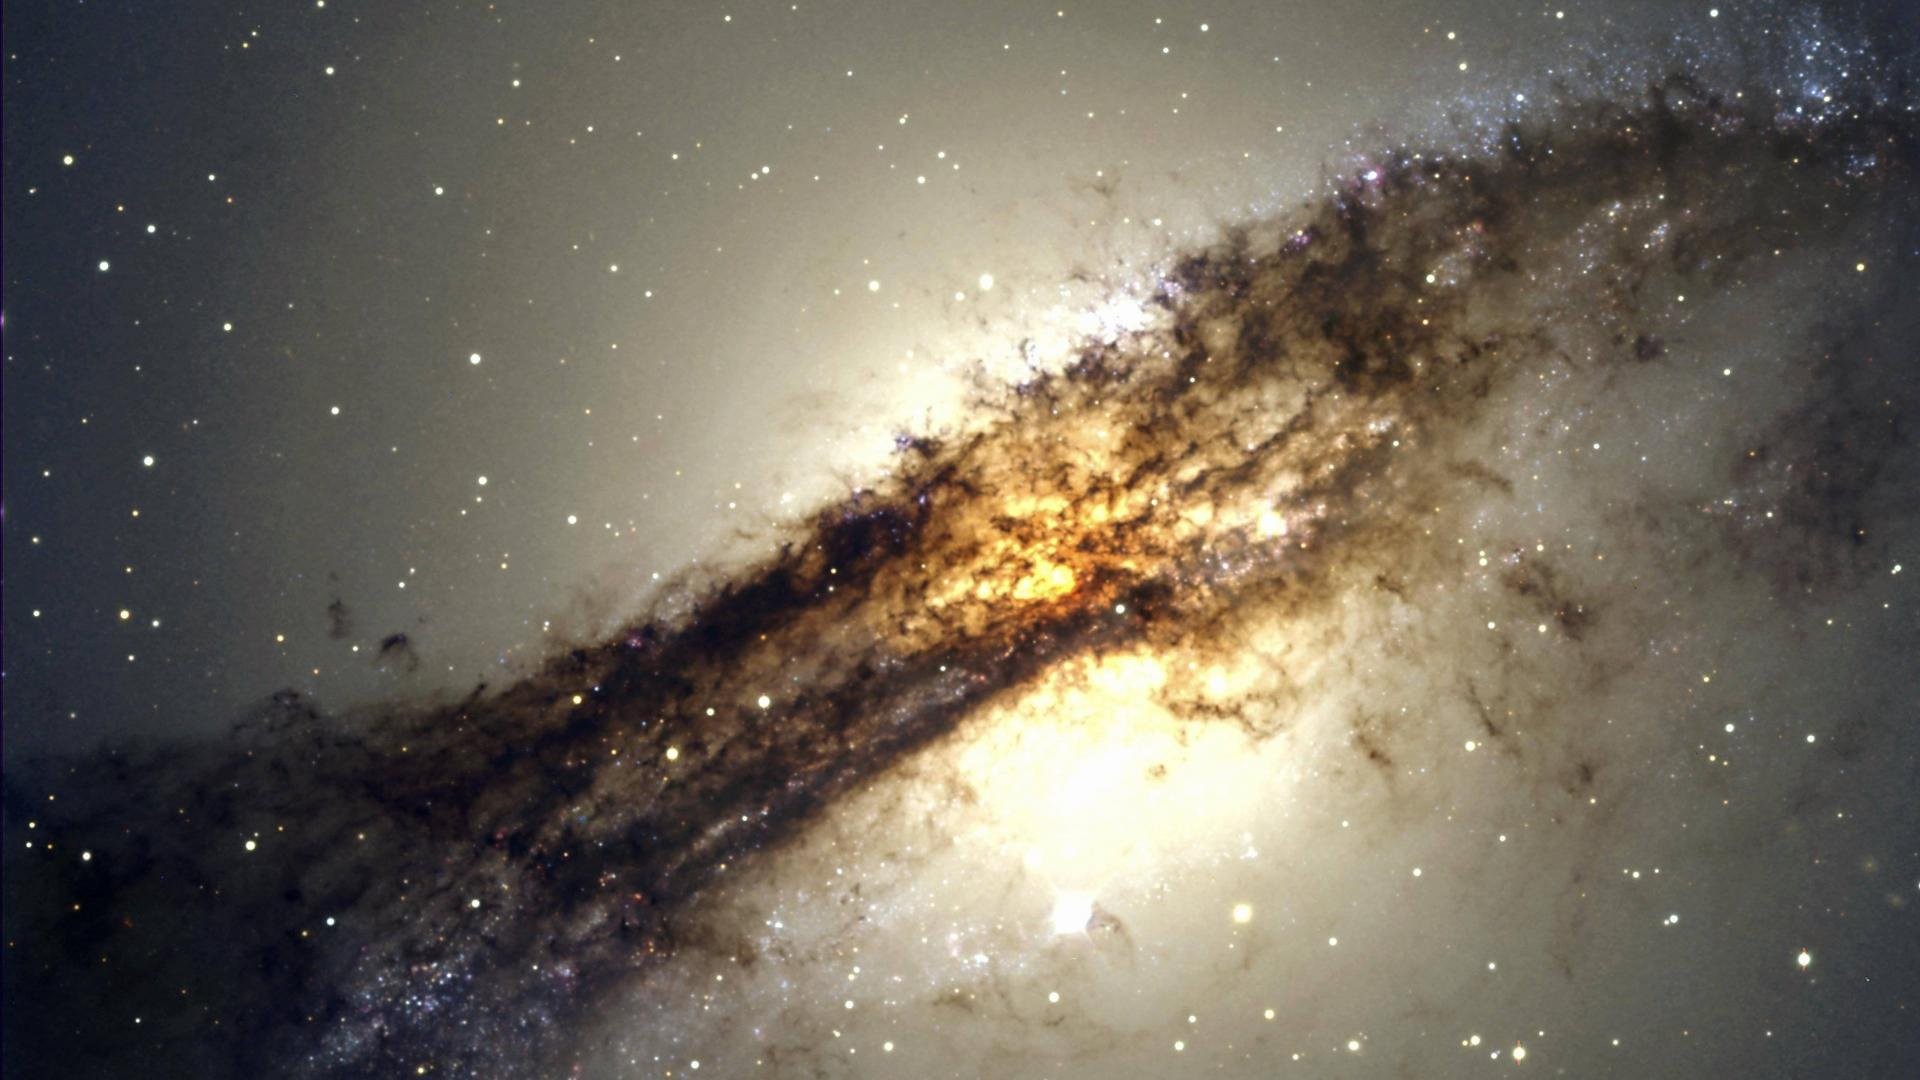 Space outer universe stars photography detail astronomy nasa hubble  wallpaper | | 670062 | WallpaperUP